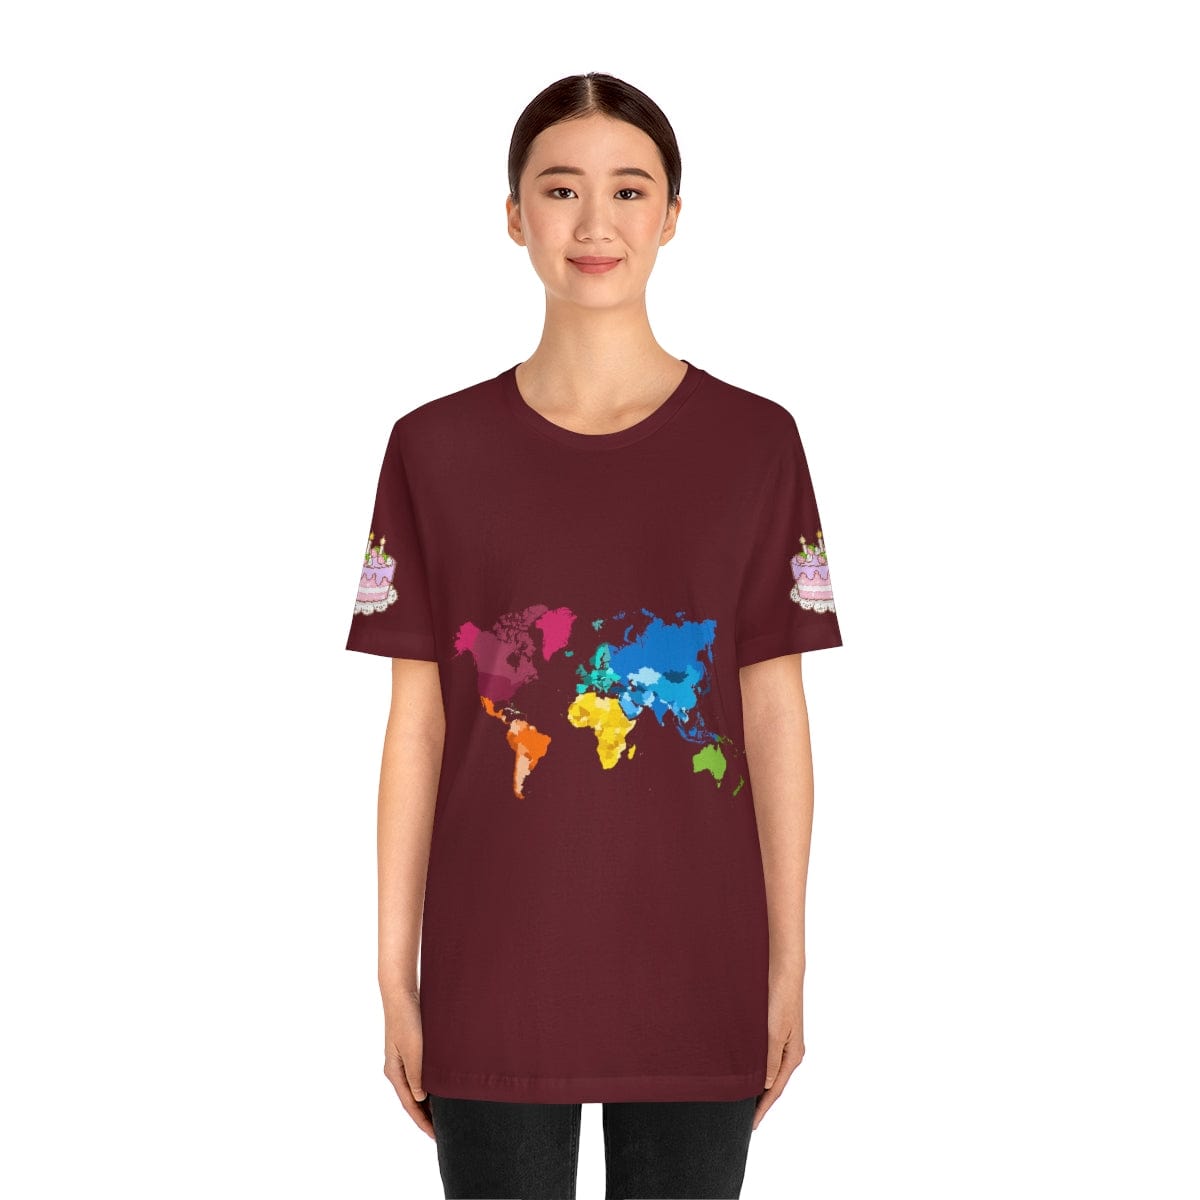 The Vision Slayer All Premium Limited Edition The World Is A Piece Of Cake Maroon T-shirt